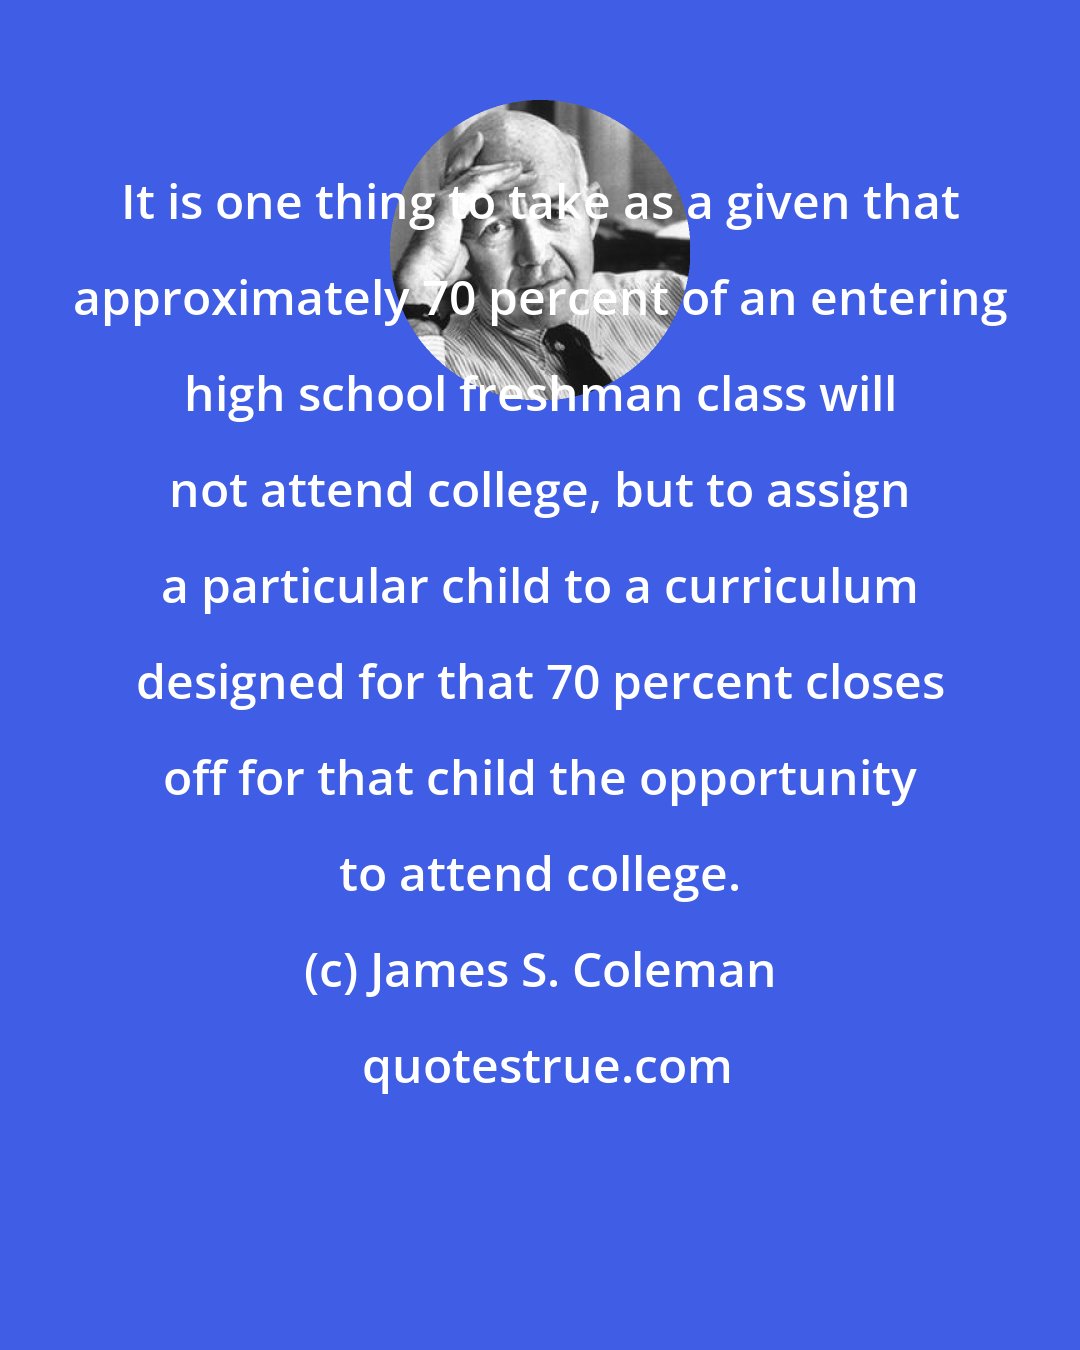 James S. Coleman: It is one thing to take as a given that approximately 70 percent of an entering high school freshman class will not attend college, but to assign a particular child to a curriculum designed for that 70 percent closes off for that child the opportunity to attend college.